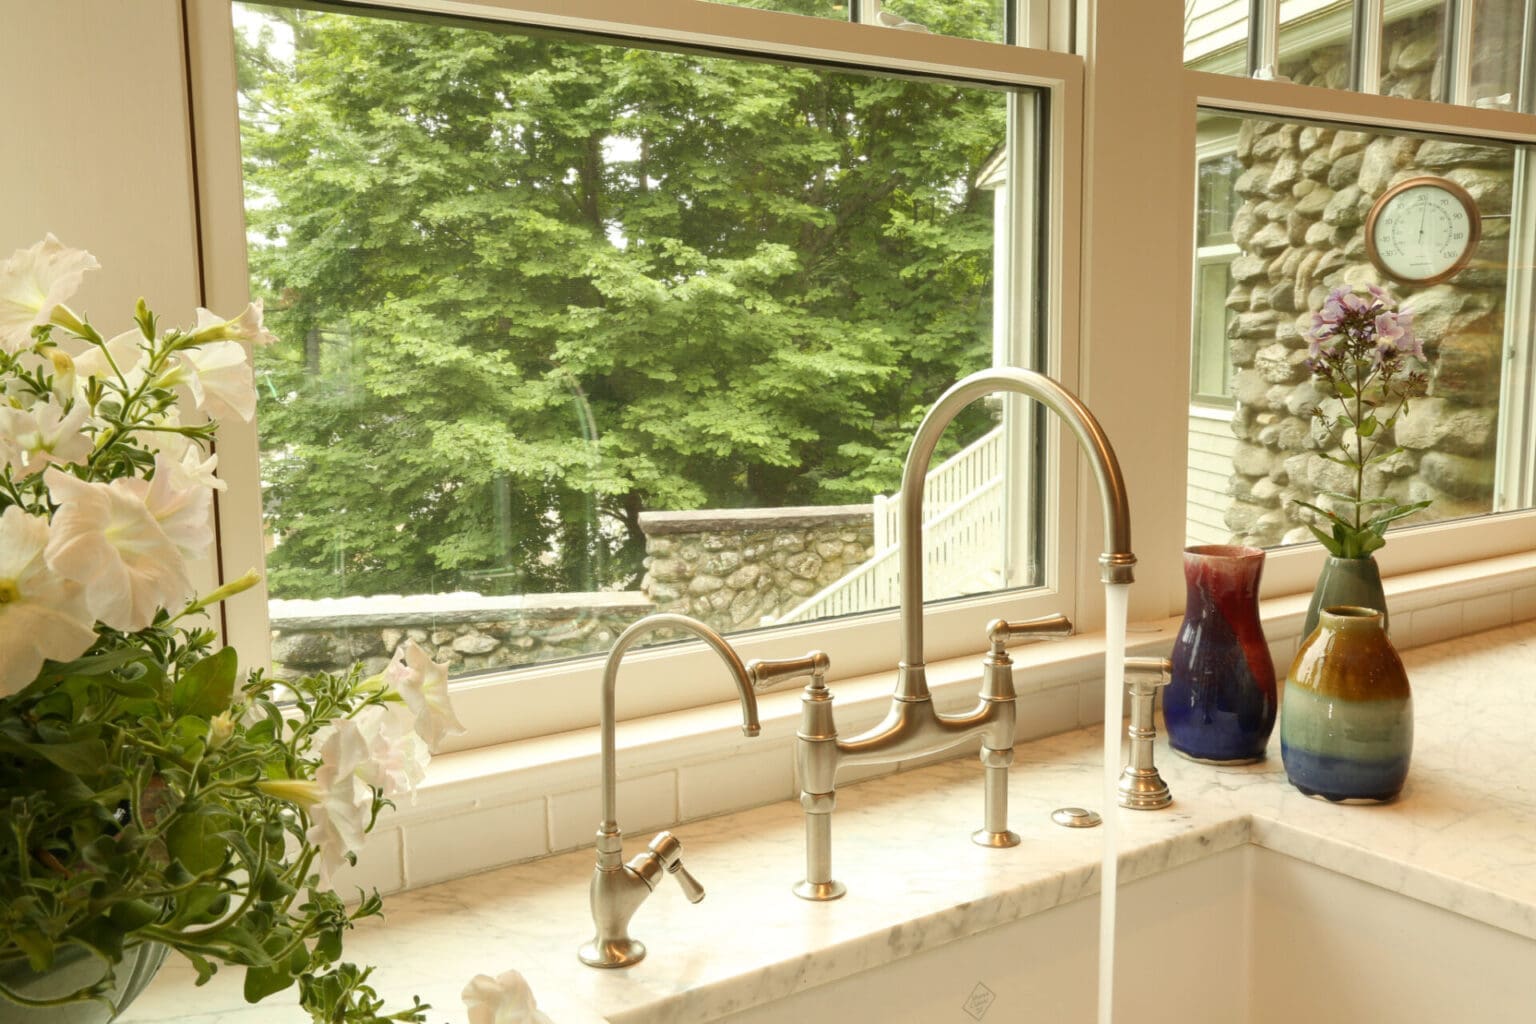 A photo of a running faucet in front of a large window in a kitchen with marble countertops.